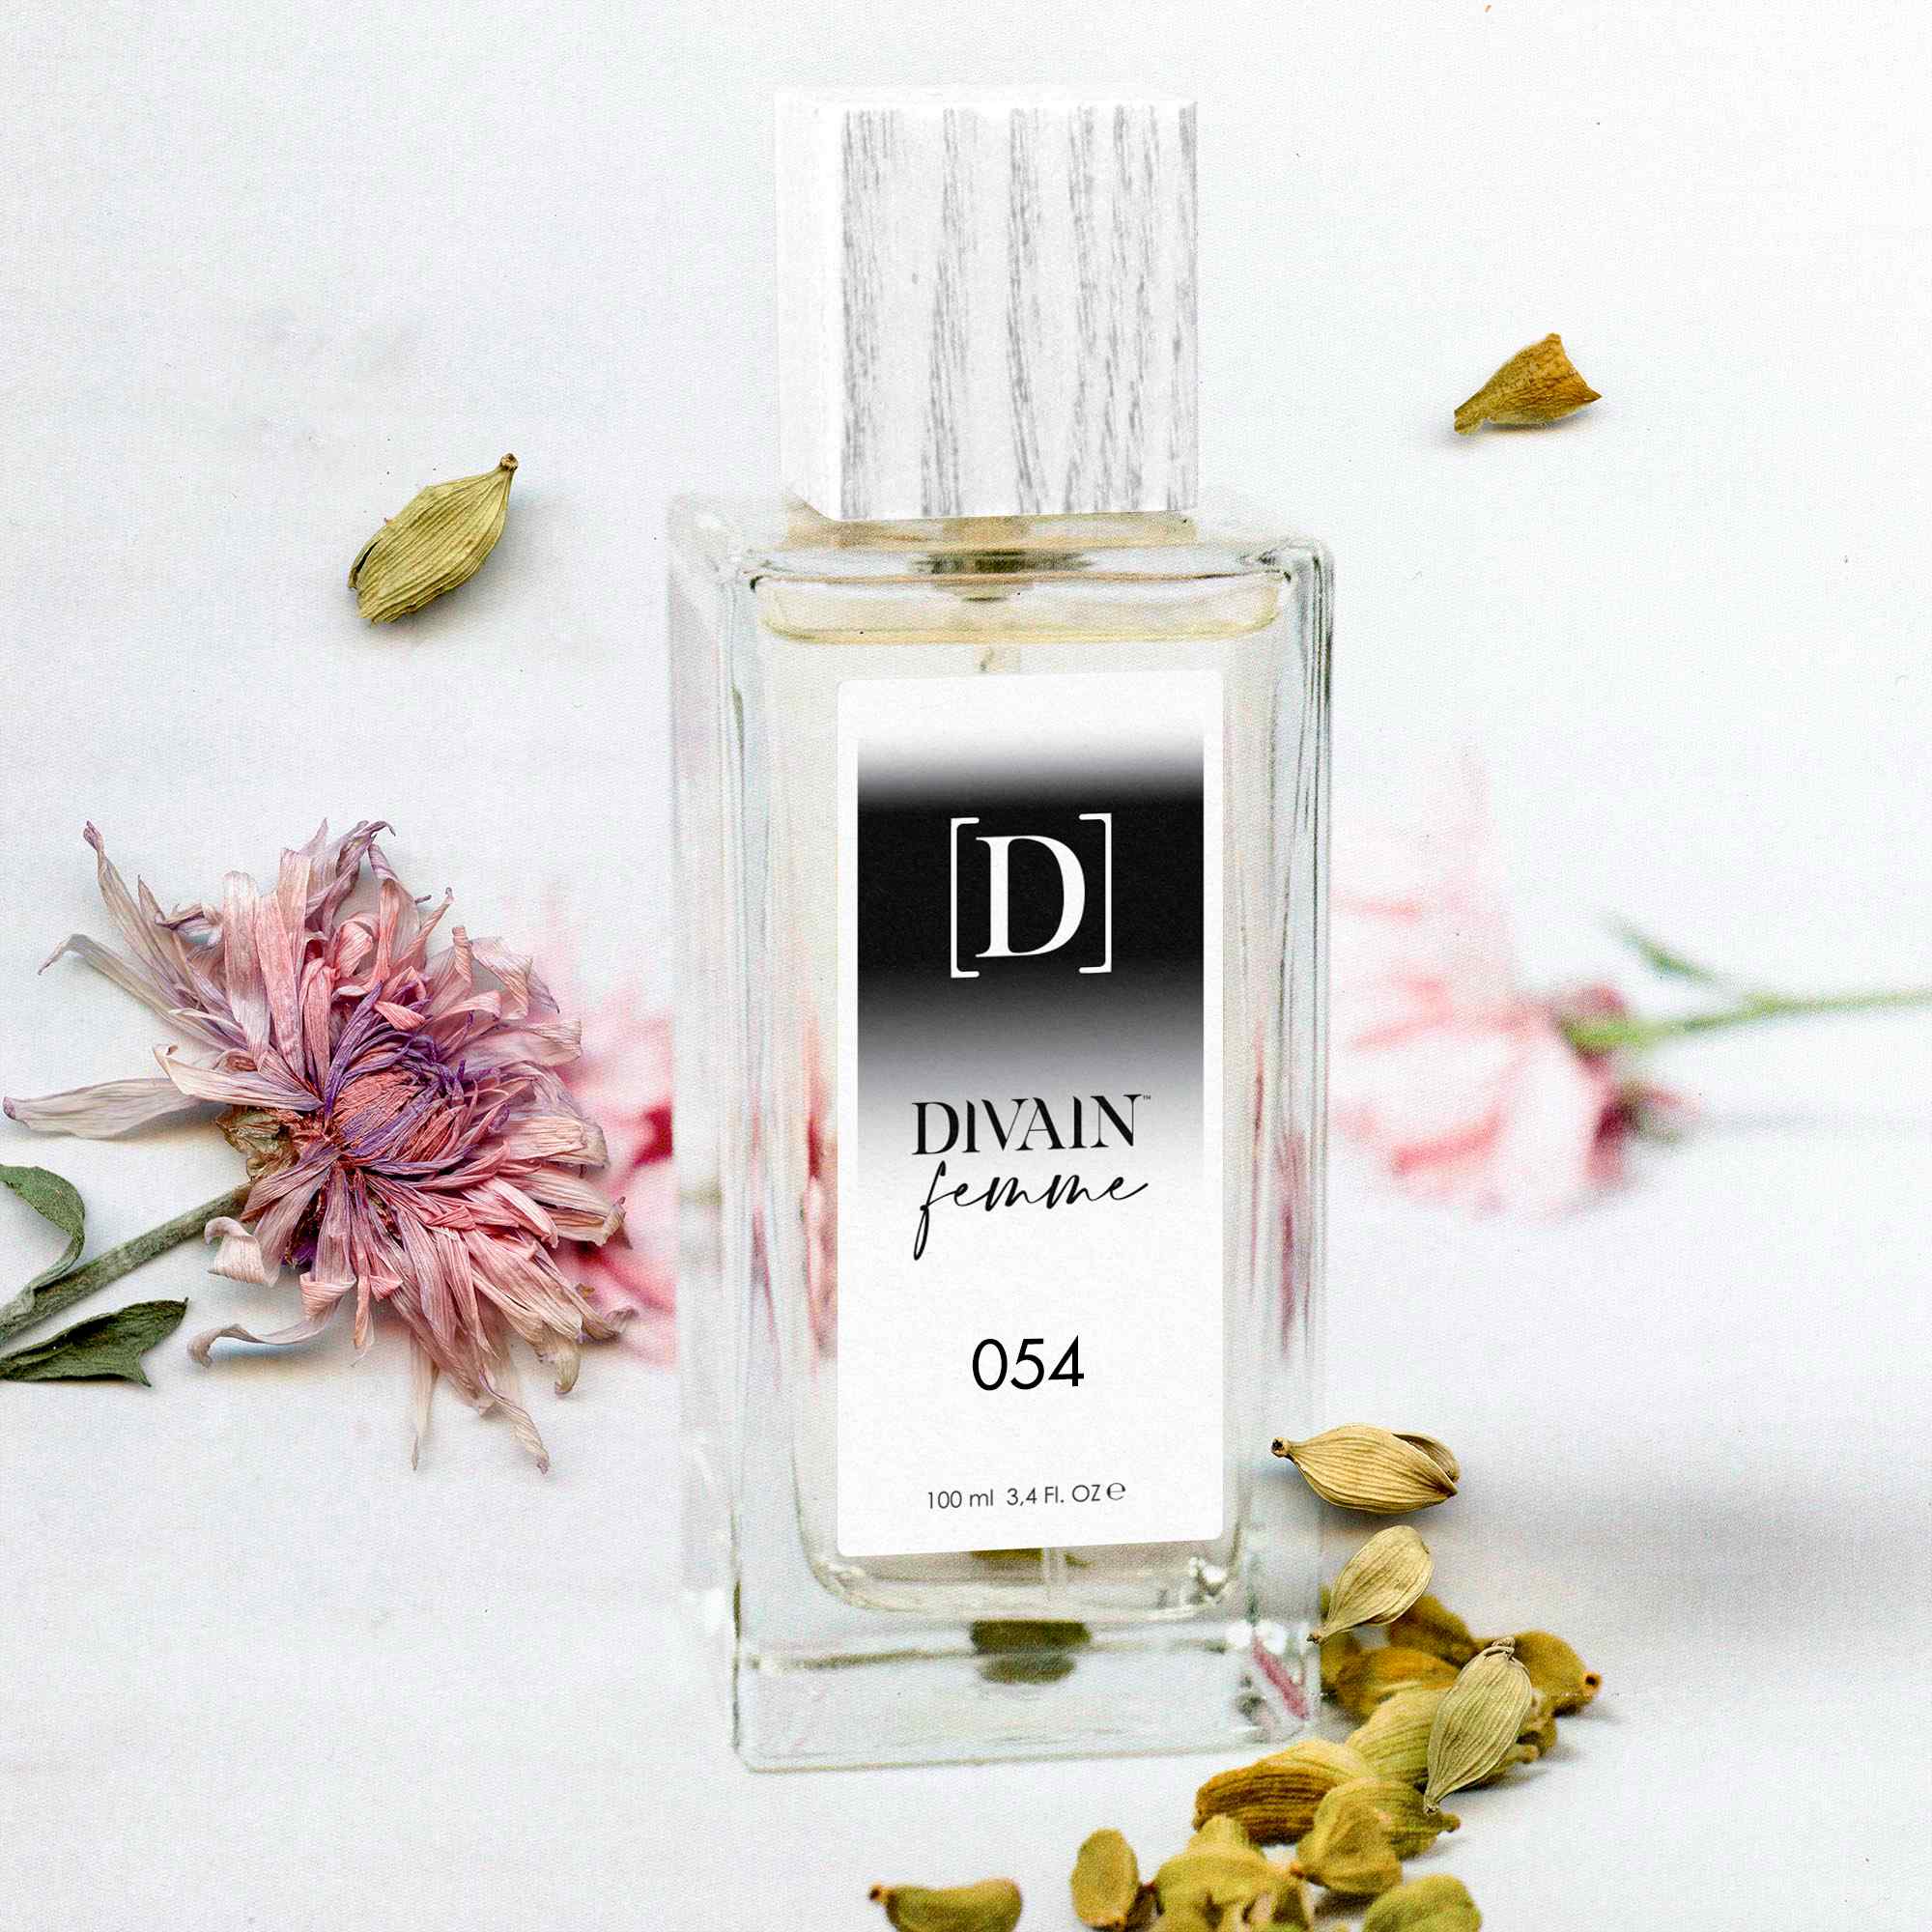 Buy the best equivalent Dior women's perfumes